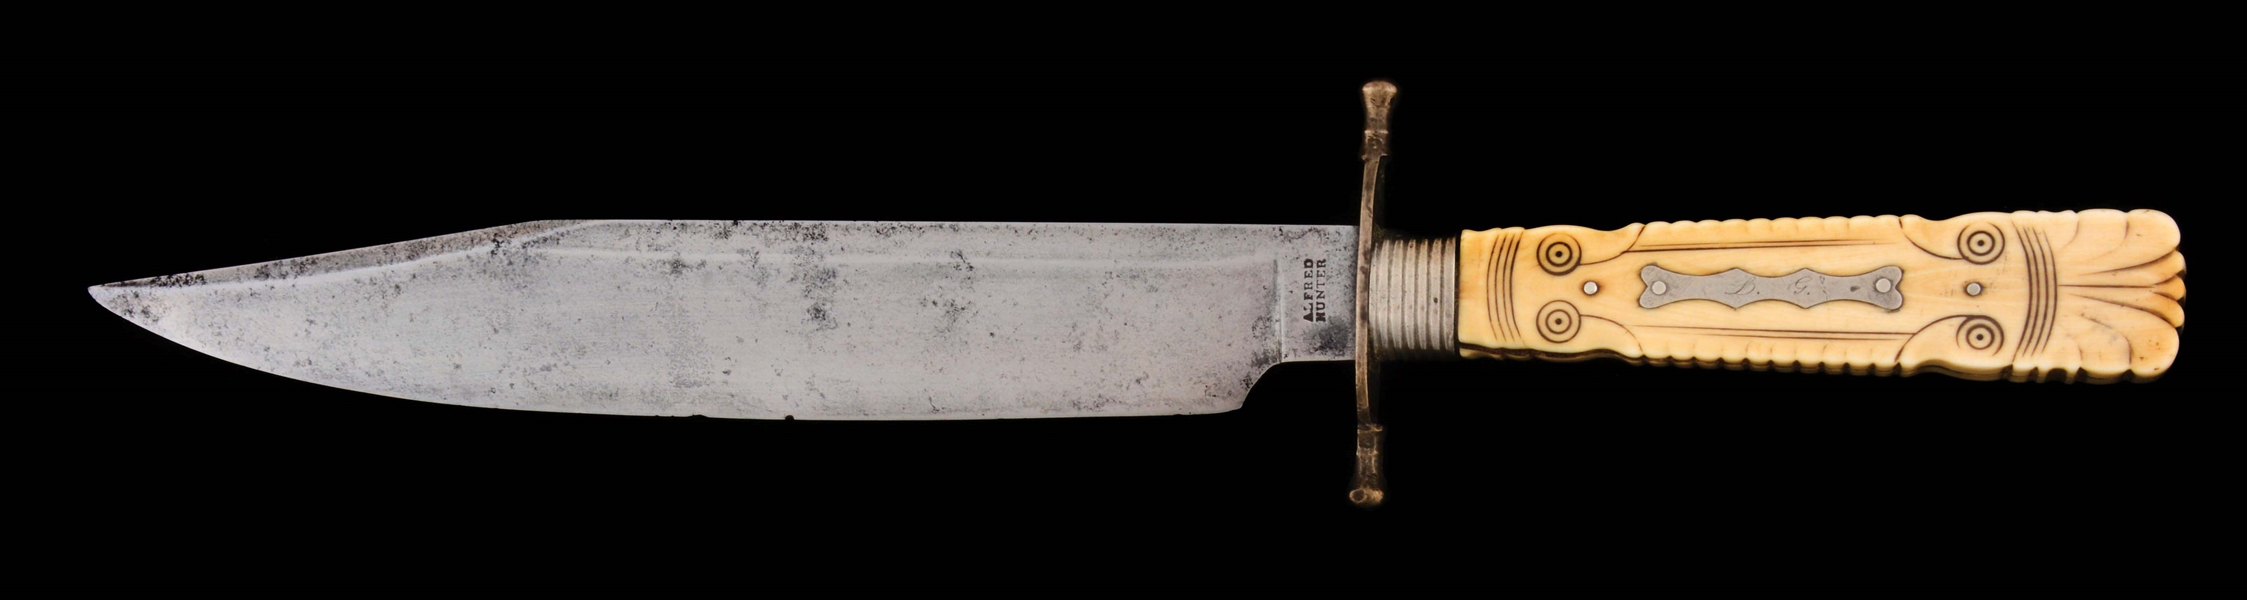 ALFRED HUNTER BOWIE WITH CARVED IVORY HANDLE.